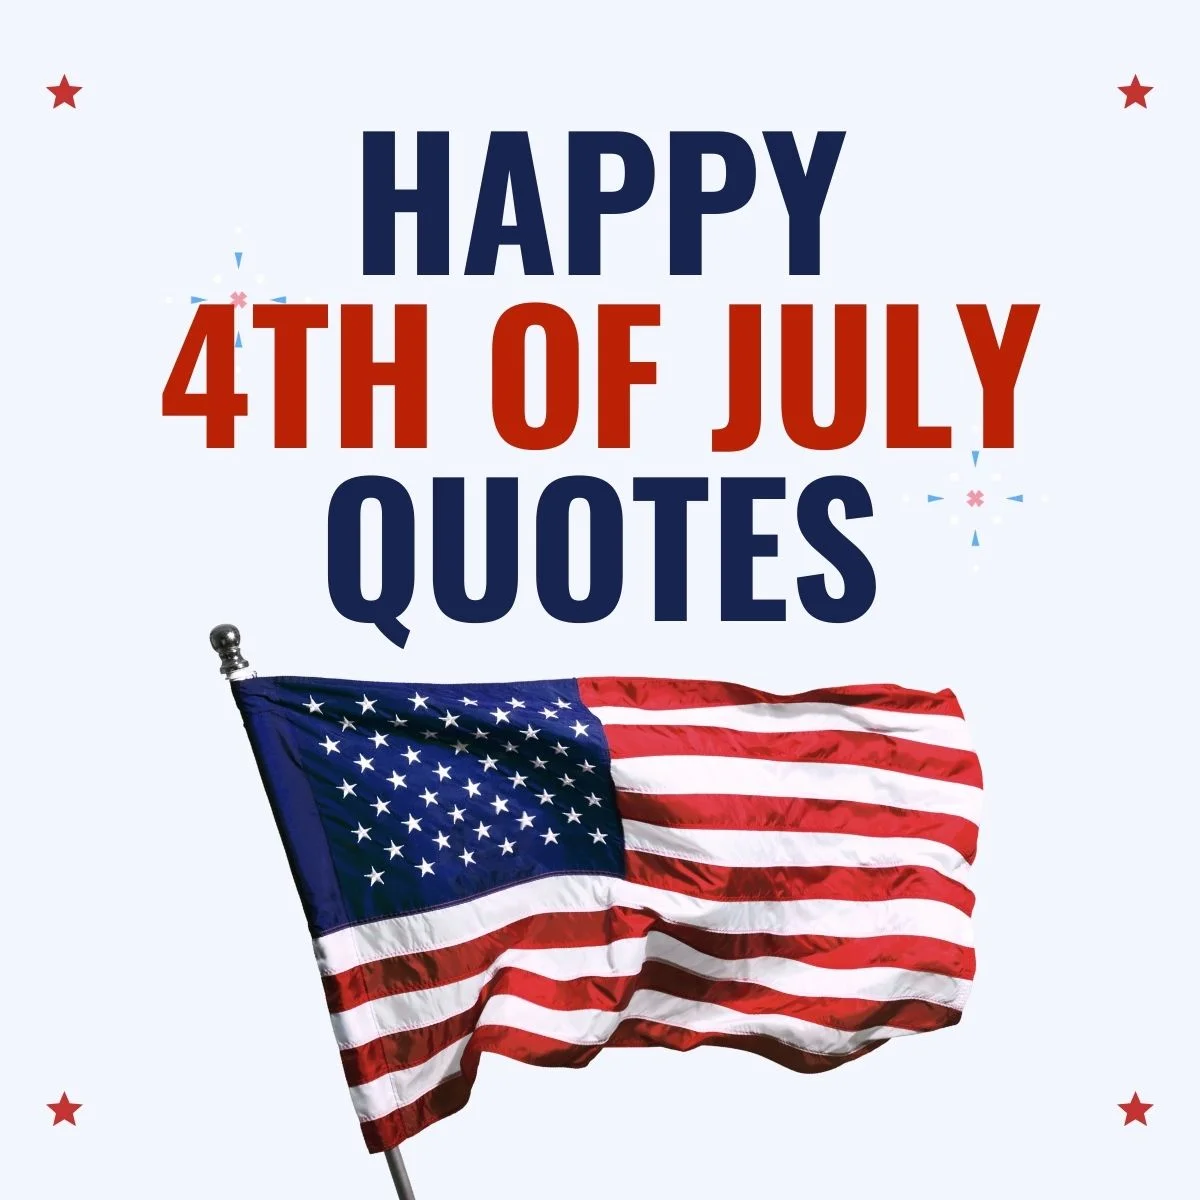 Festive and Inspiring Happy 4th of July Quotes